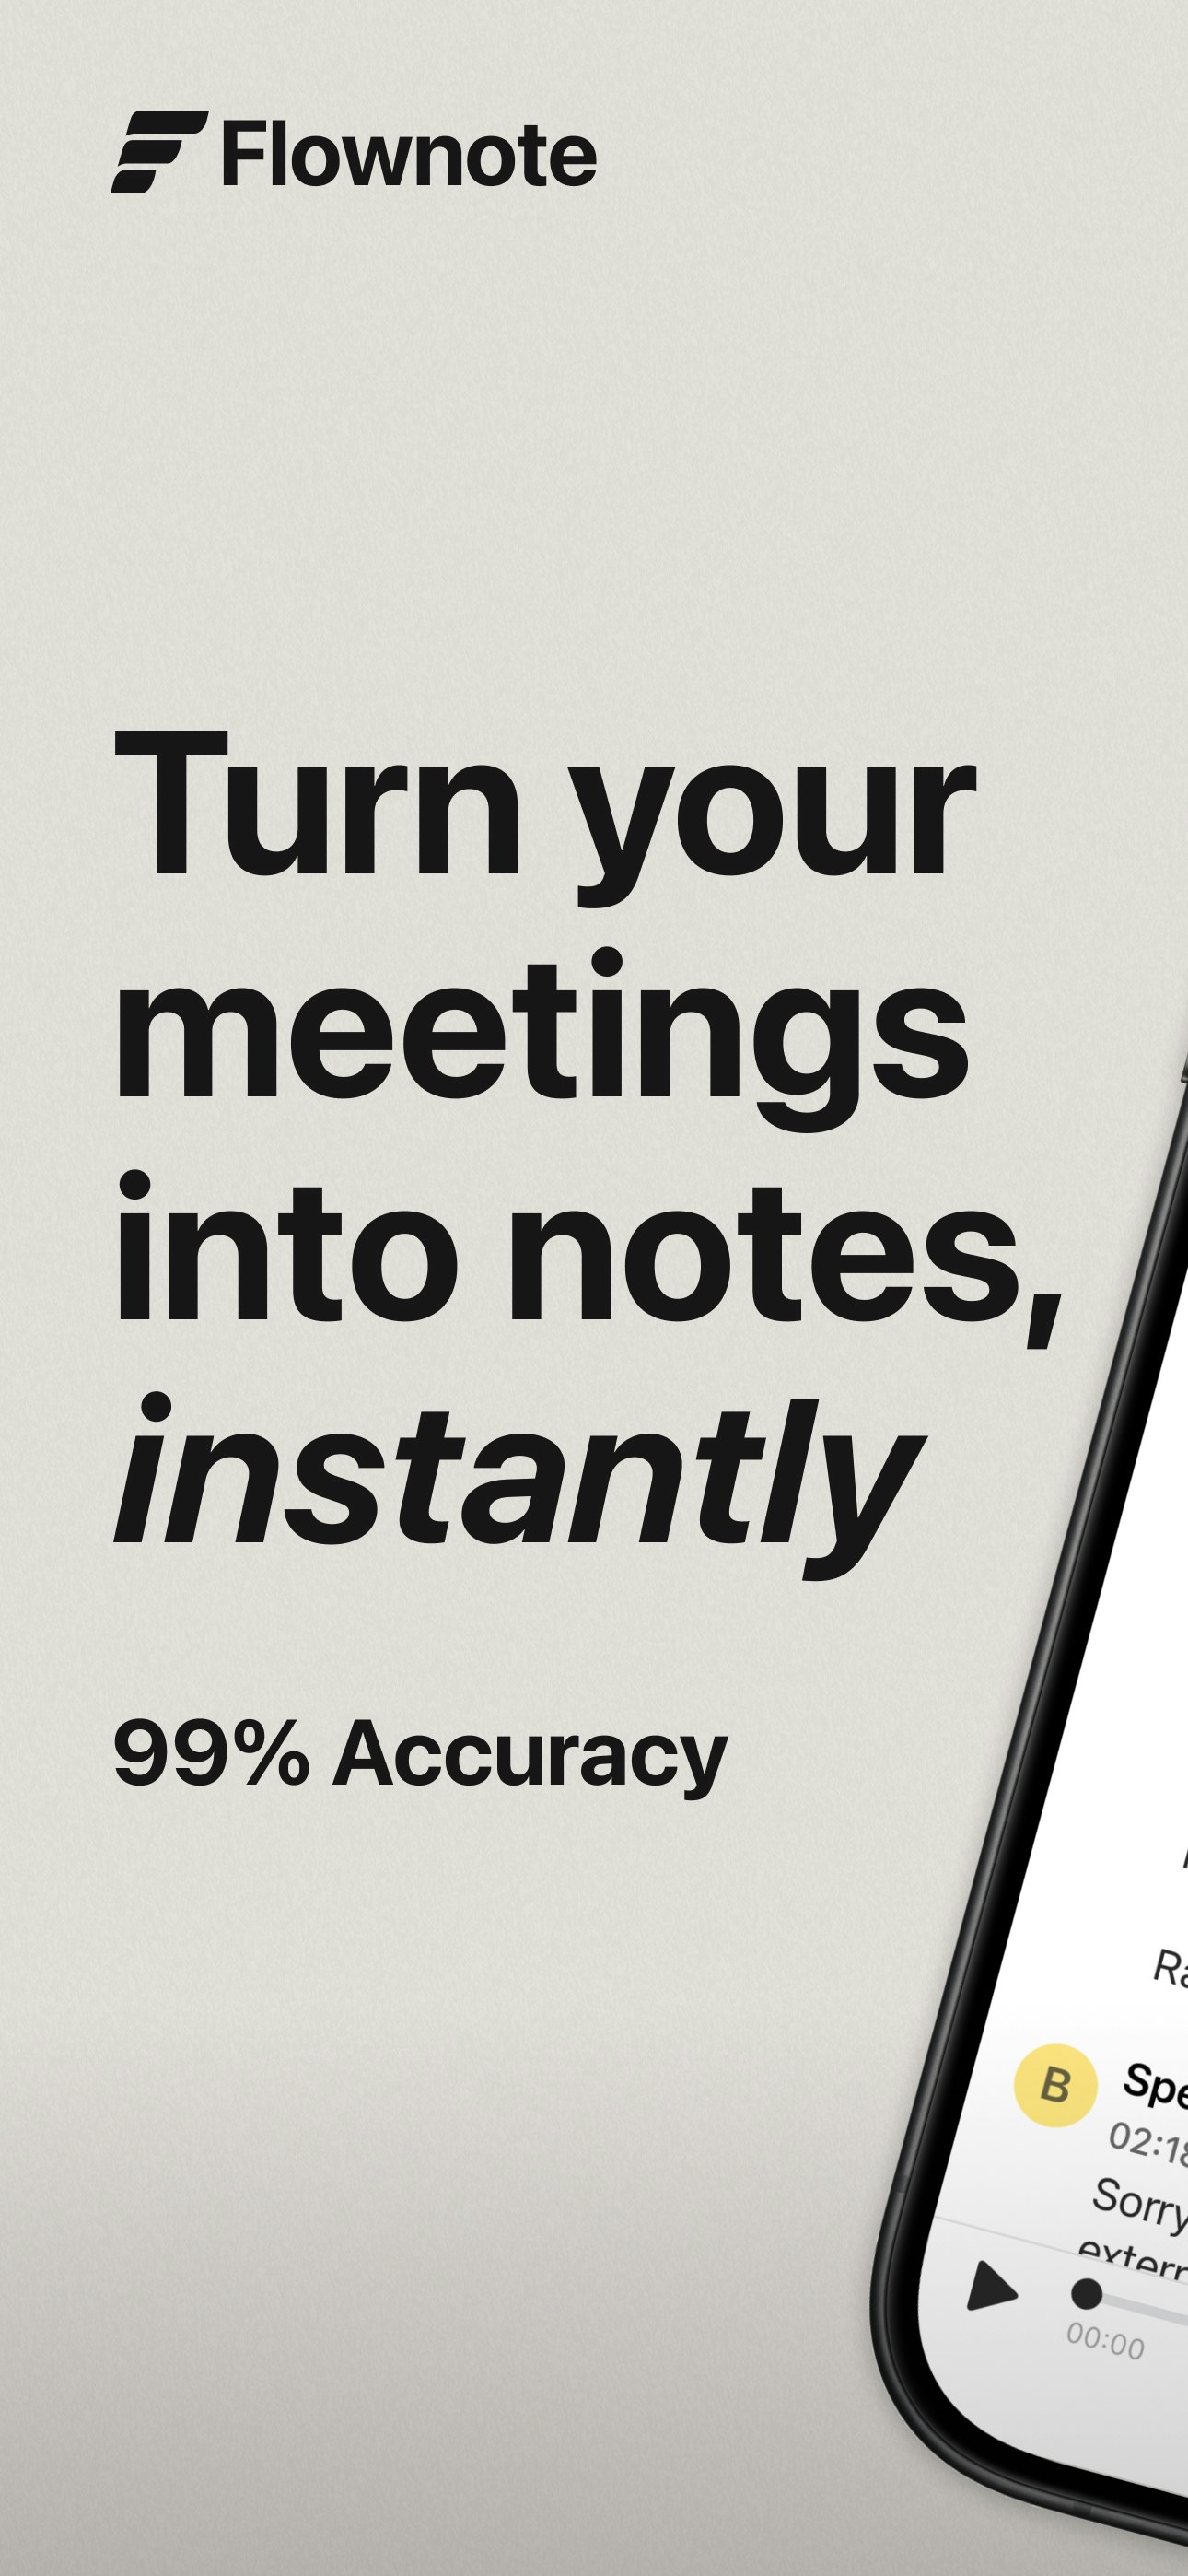 flownote-4 - Instantly transcribe and summarize meetings from your phone